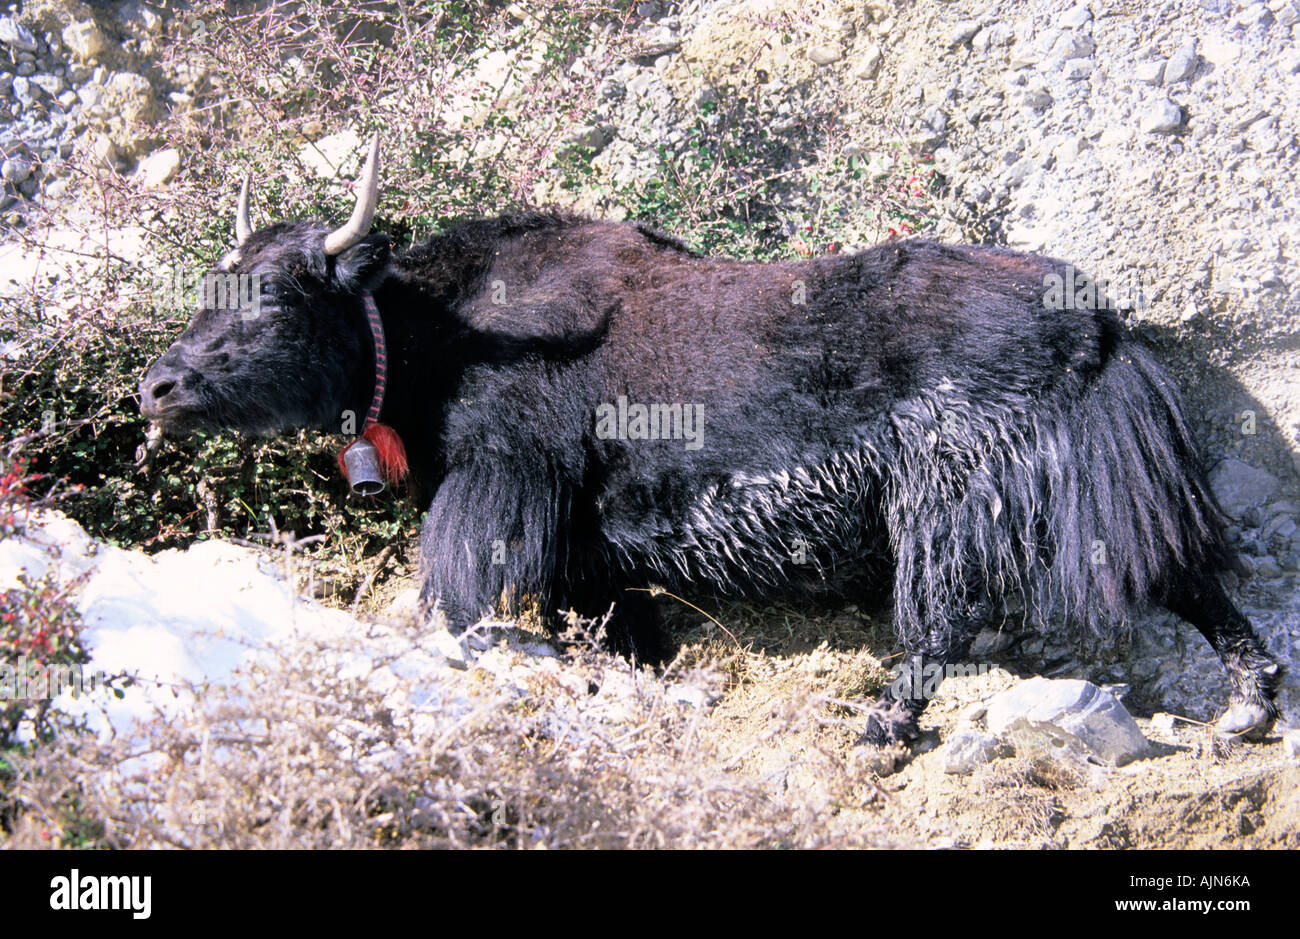 Yak Bos mufus f. grunniens in Manang surroundings Annapurna Conservation Area Nepal Stock Photo